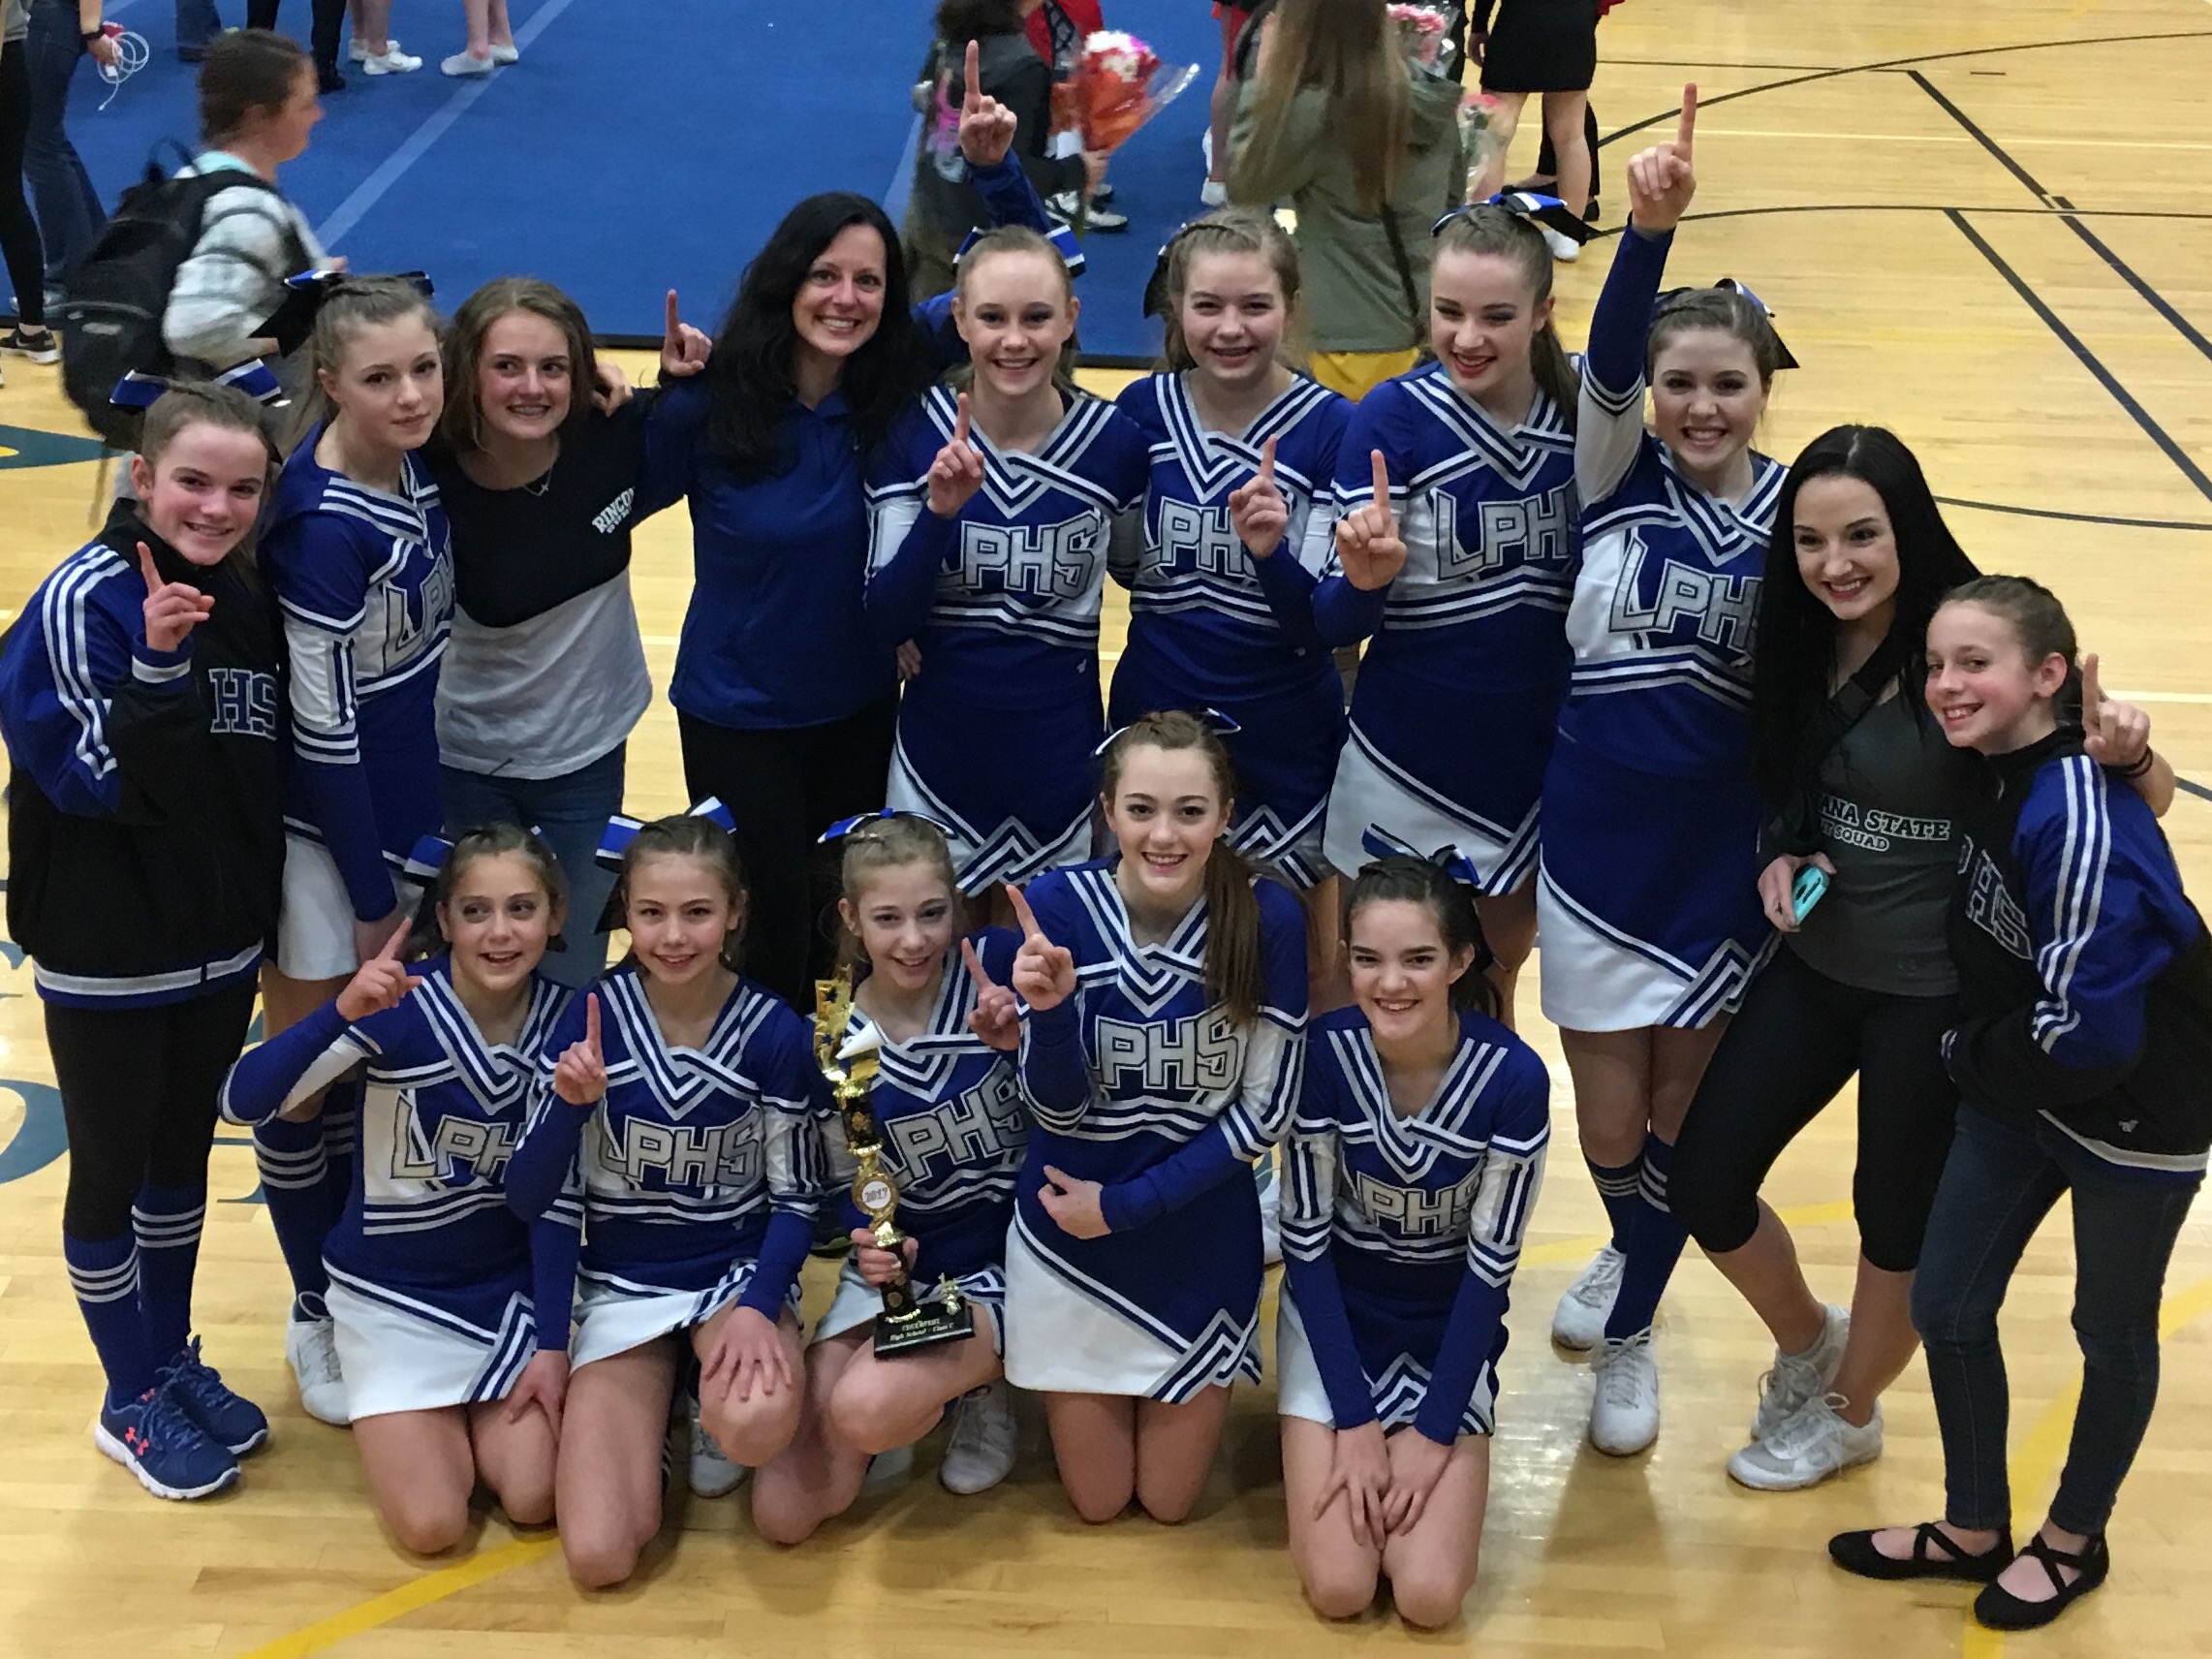 Lone Peak takes home first place in statewide cheerleading competition – Explore Big Sky